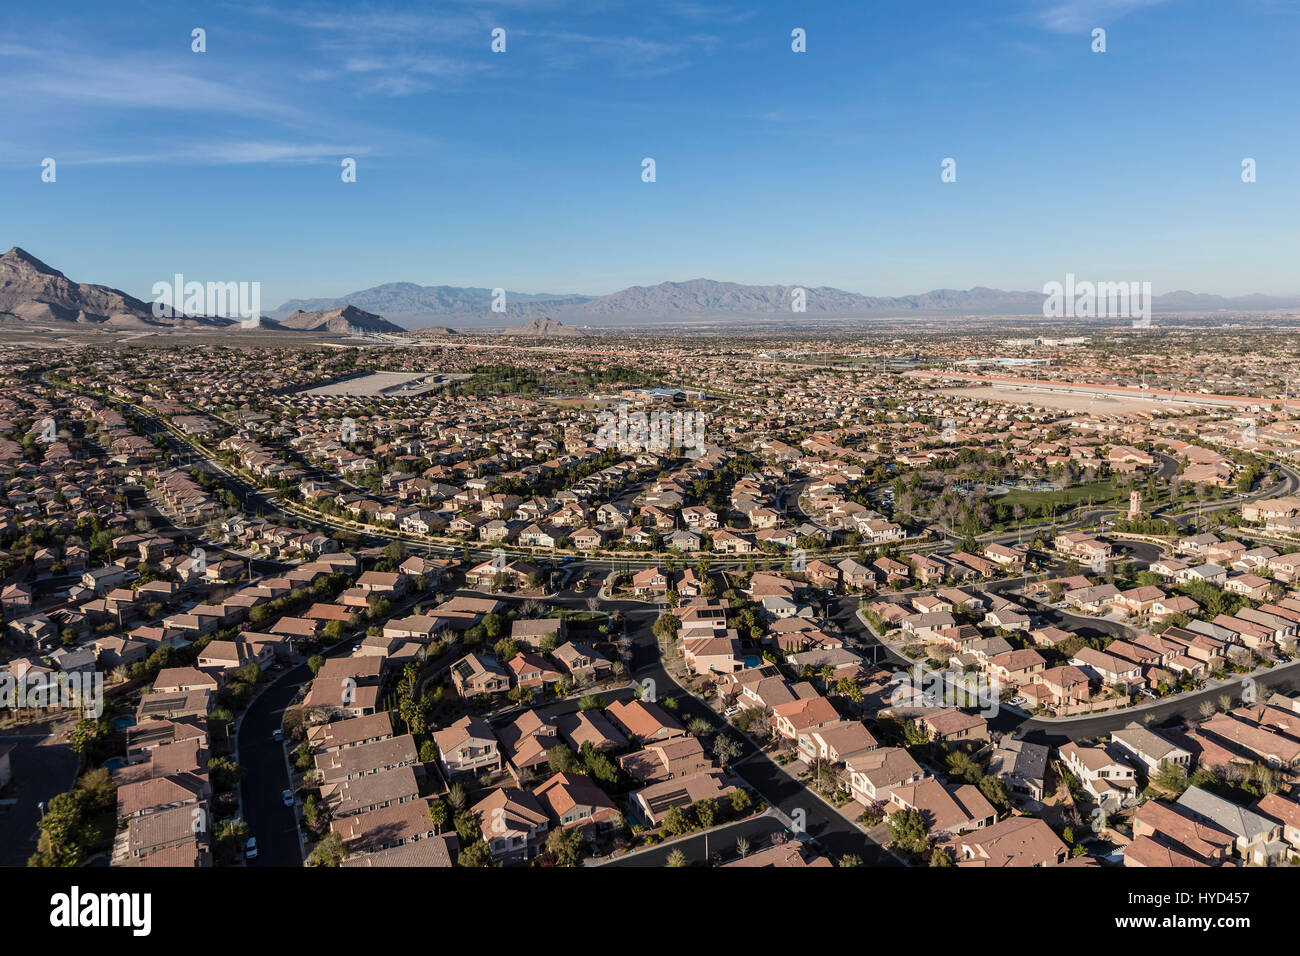 Aerial view of modern homes in the Summerlin area of Las Vegas, Nevada. Stock Photo